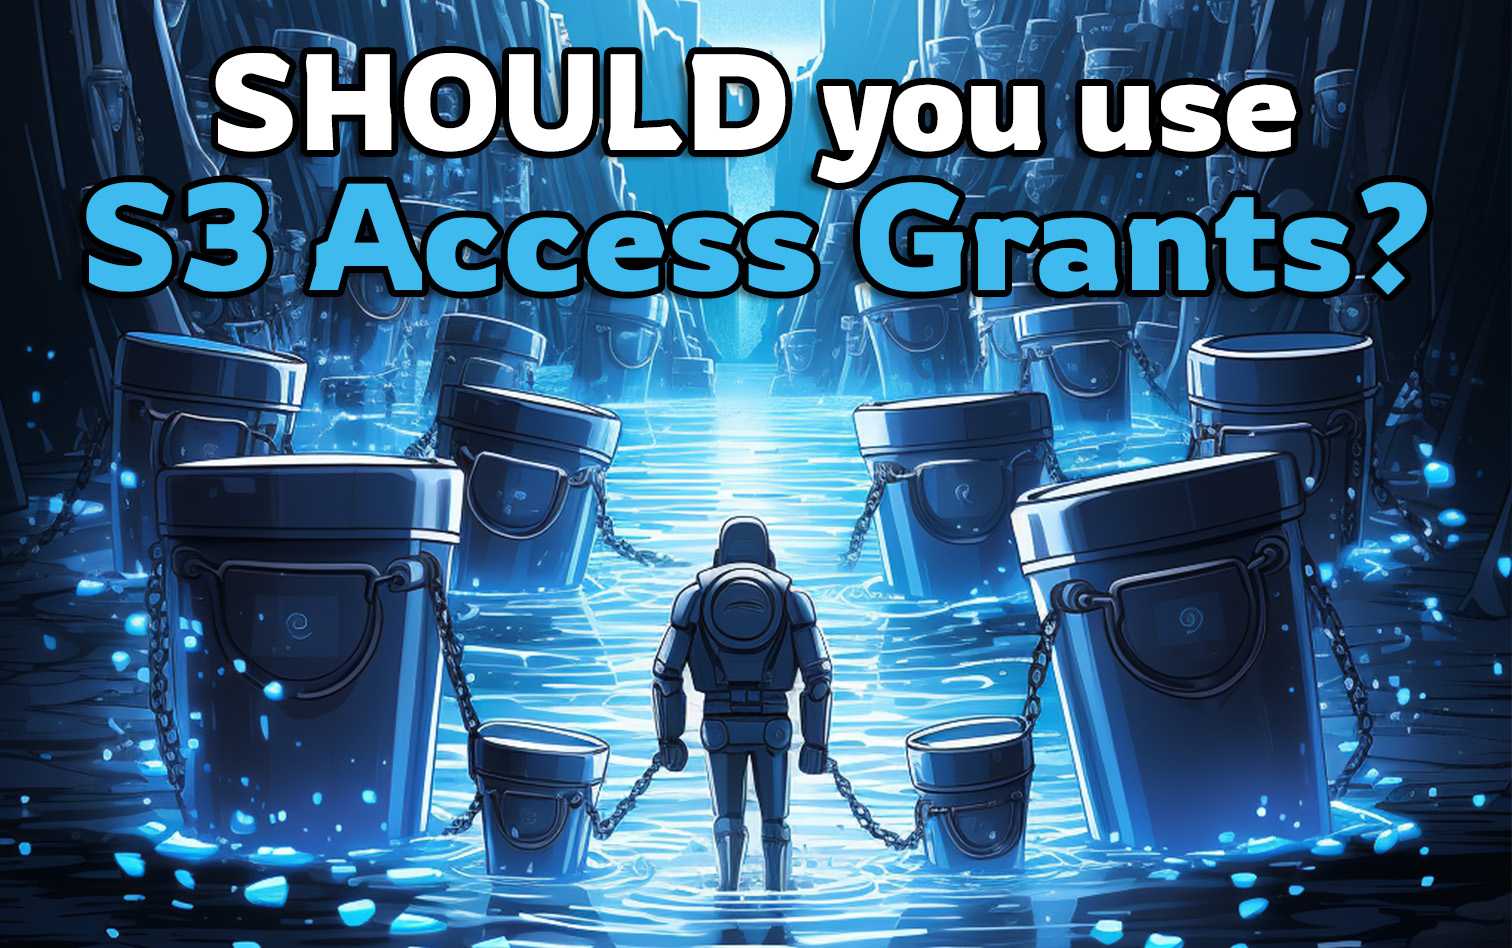 Let's Try - AWS S3 Access Grants